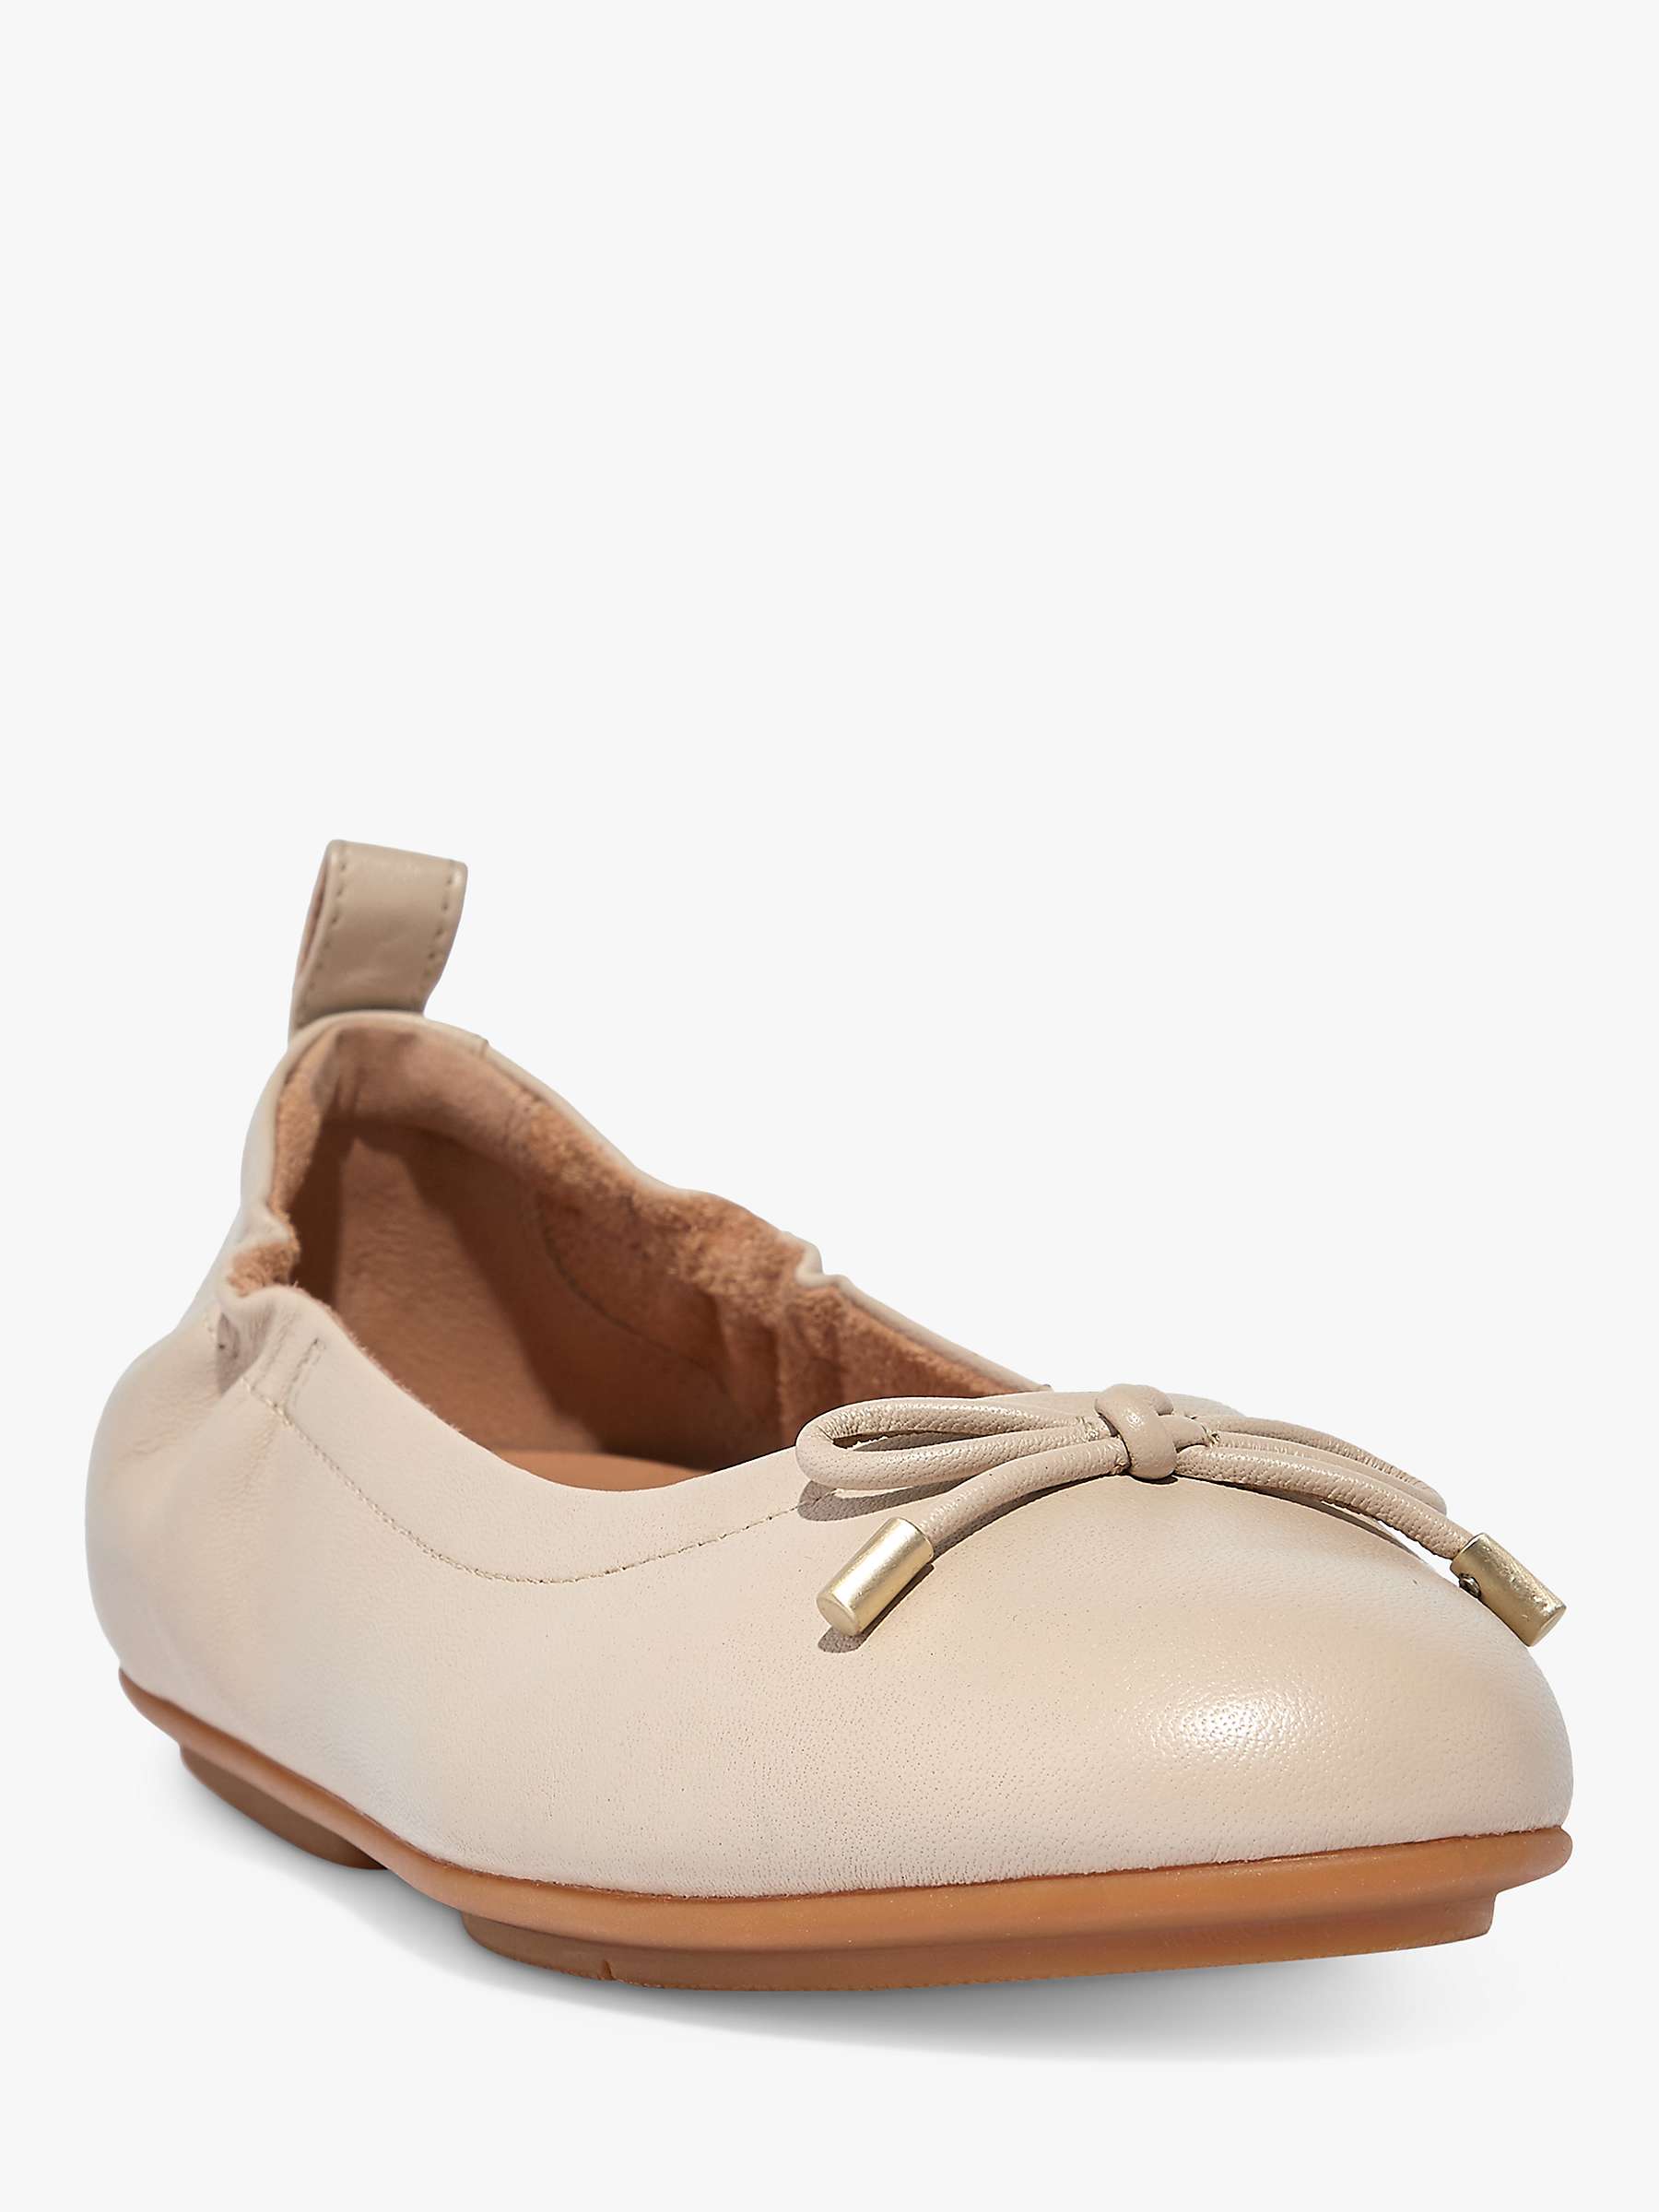 Buy FitFlop Allegro Bow Leather Pumps Online at johnlewis.com